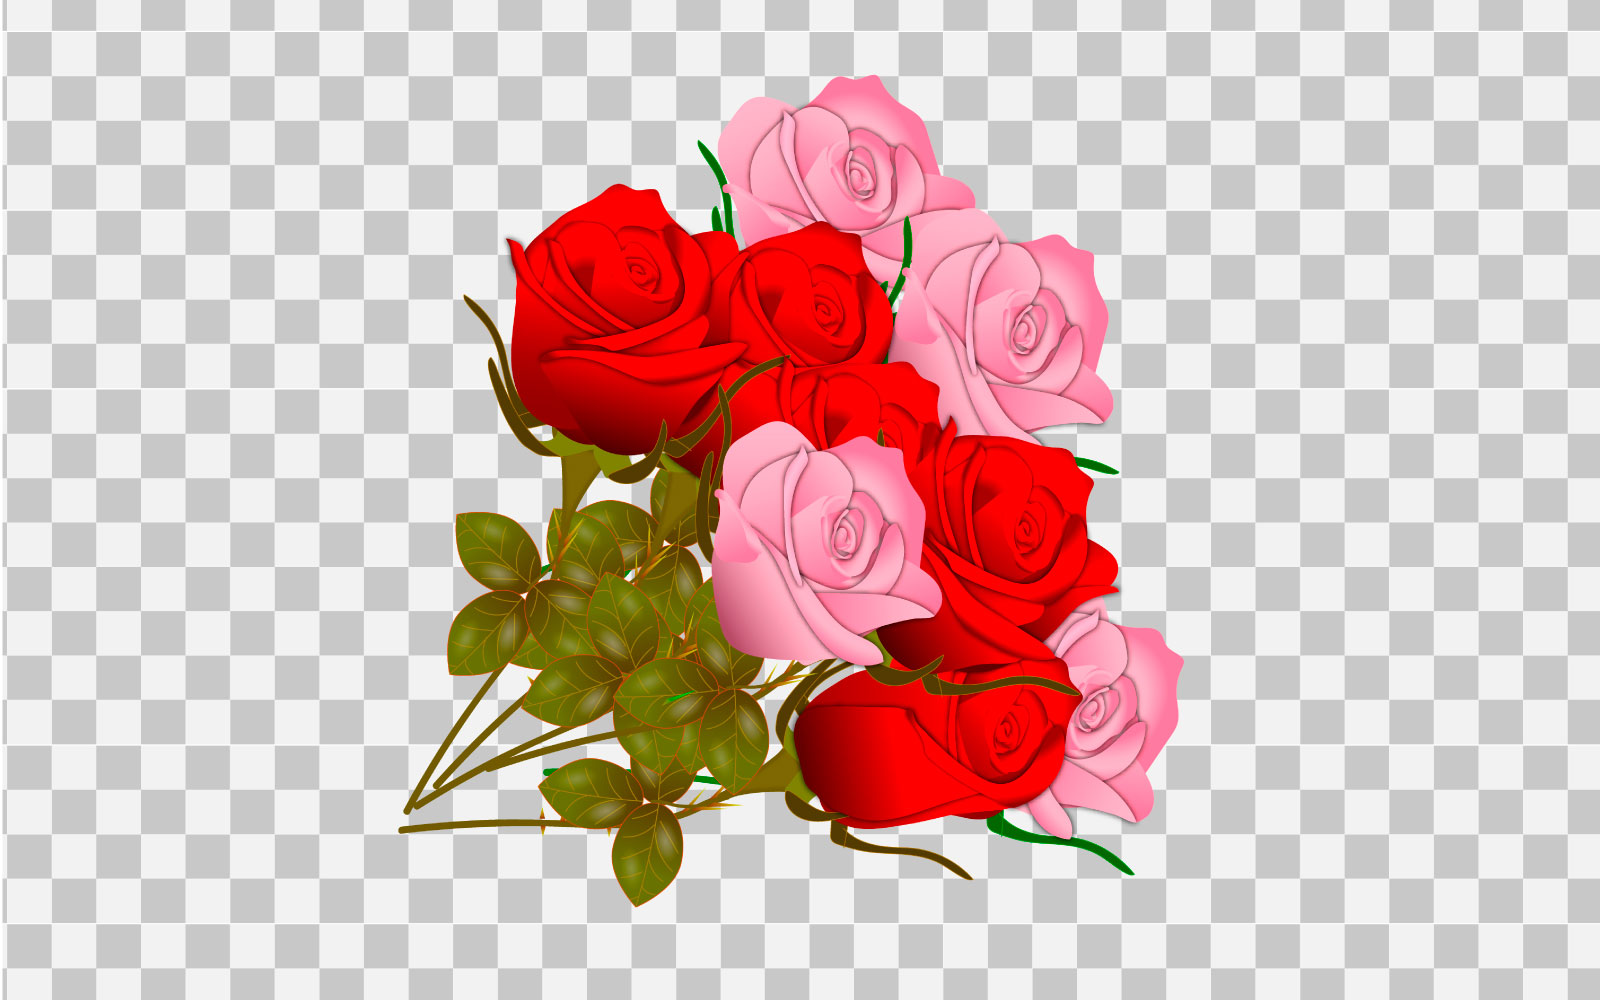 Rose realistic rose leaf and bud with red flowers illustration